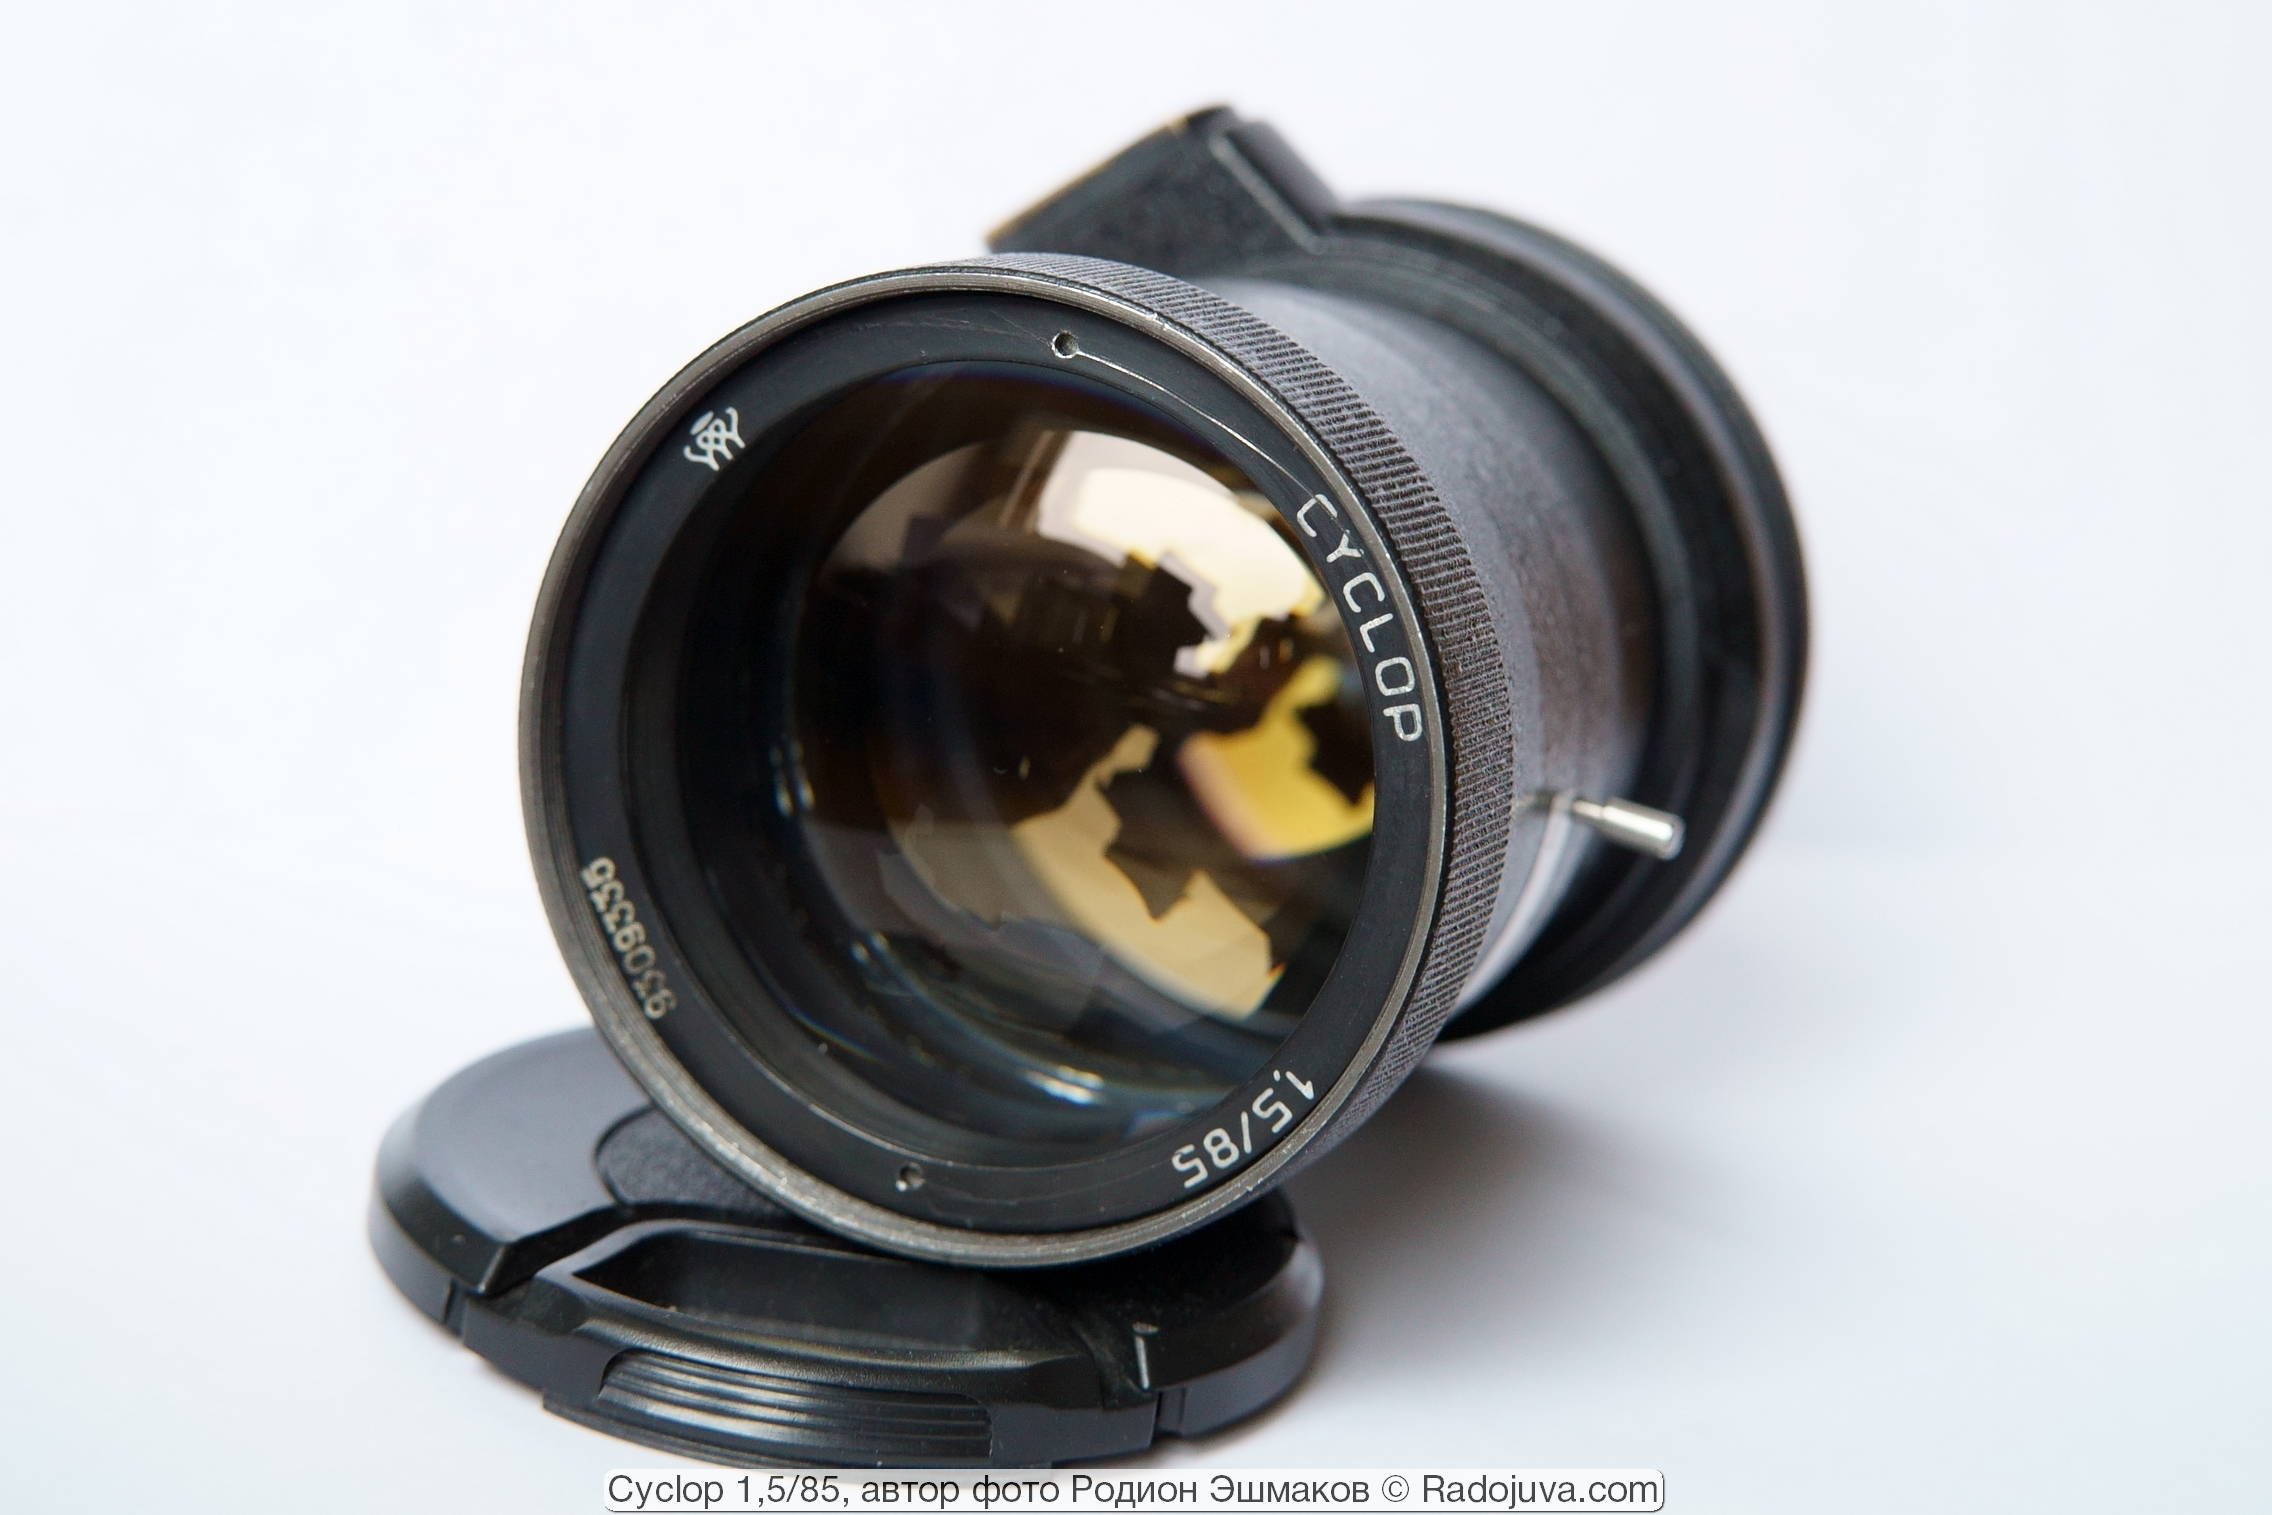 Cyclop 1,5 / 85 (ROMZ) - a technical version of Helios-40-2 for